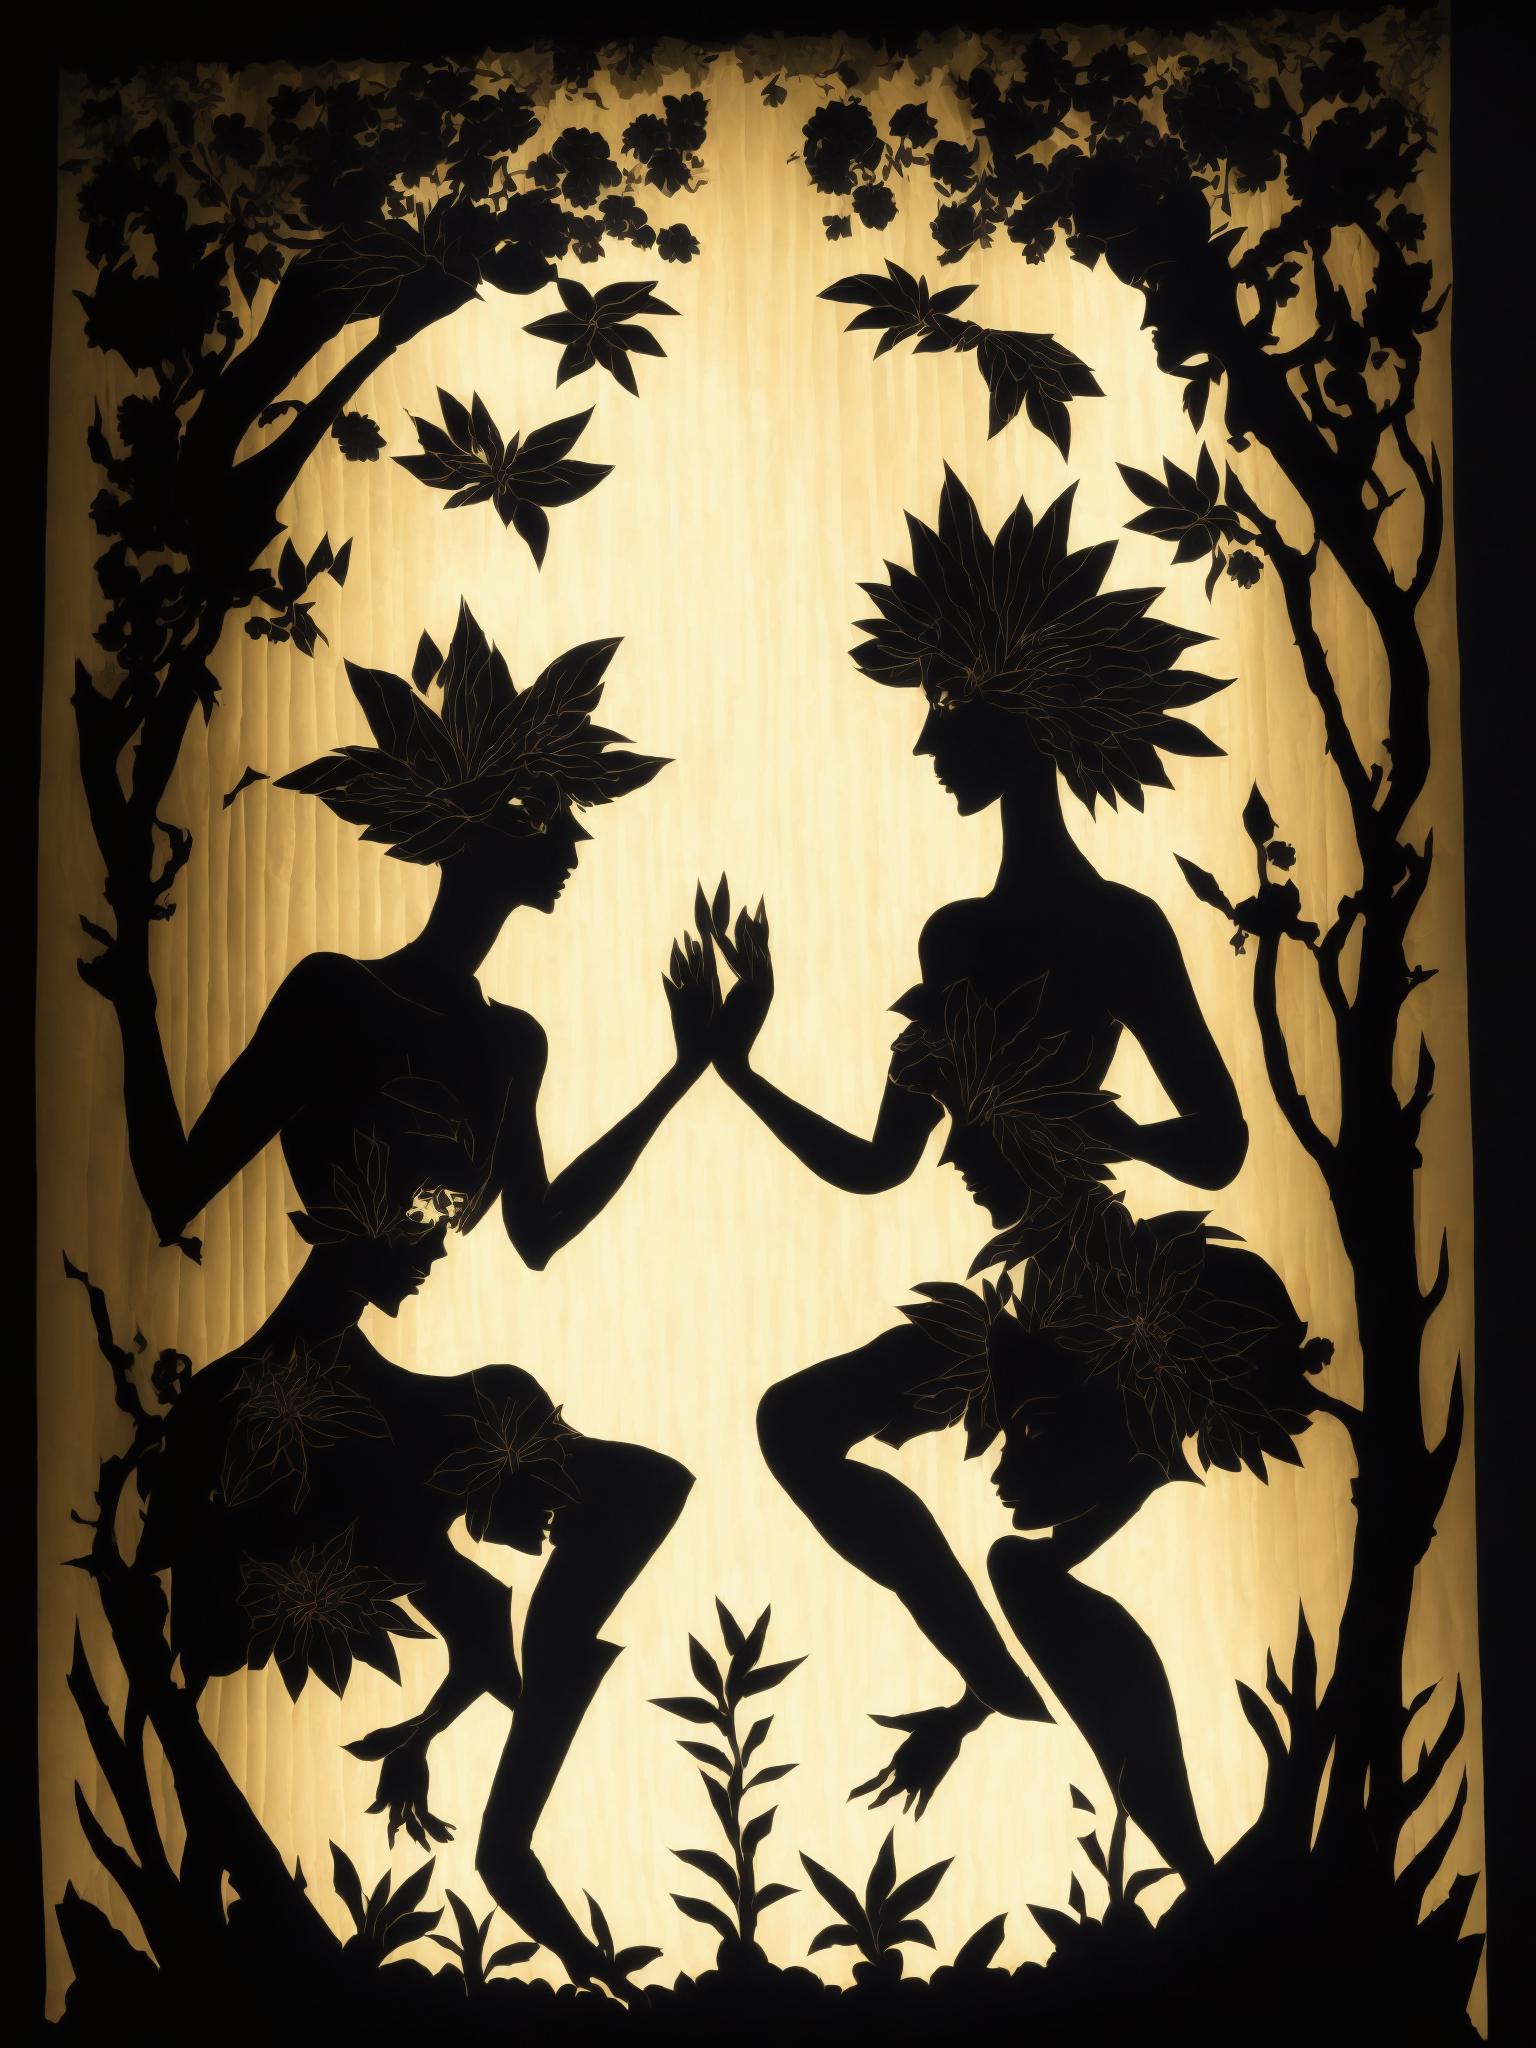 Lotte Reiniger Style image by Shivae